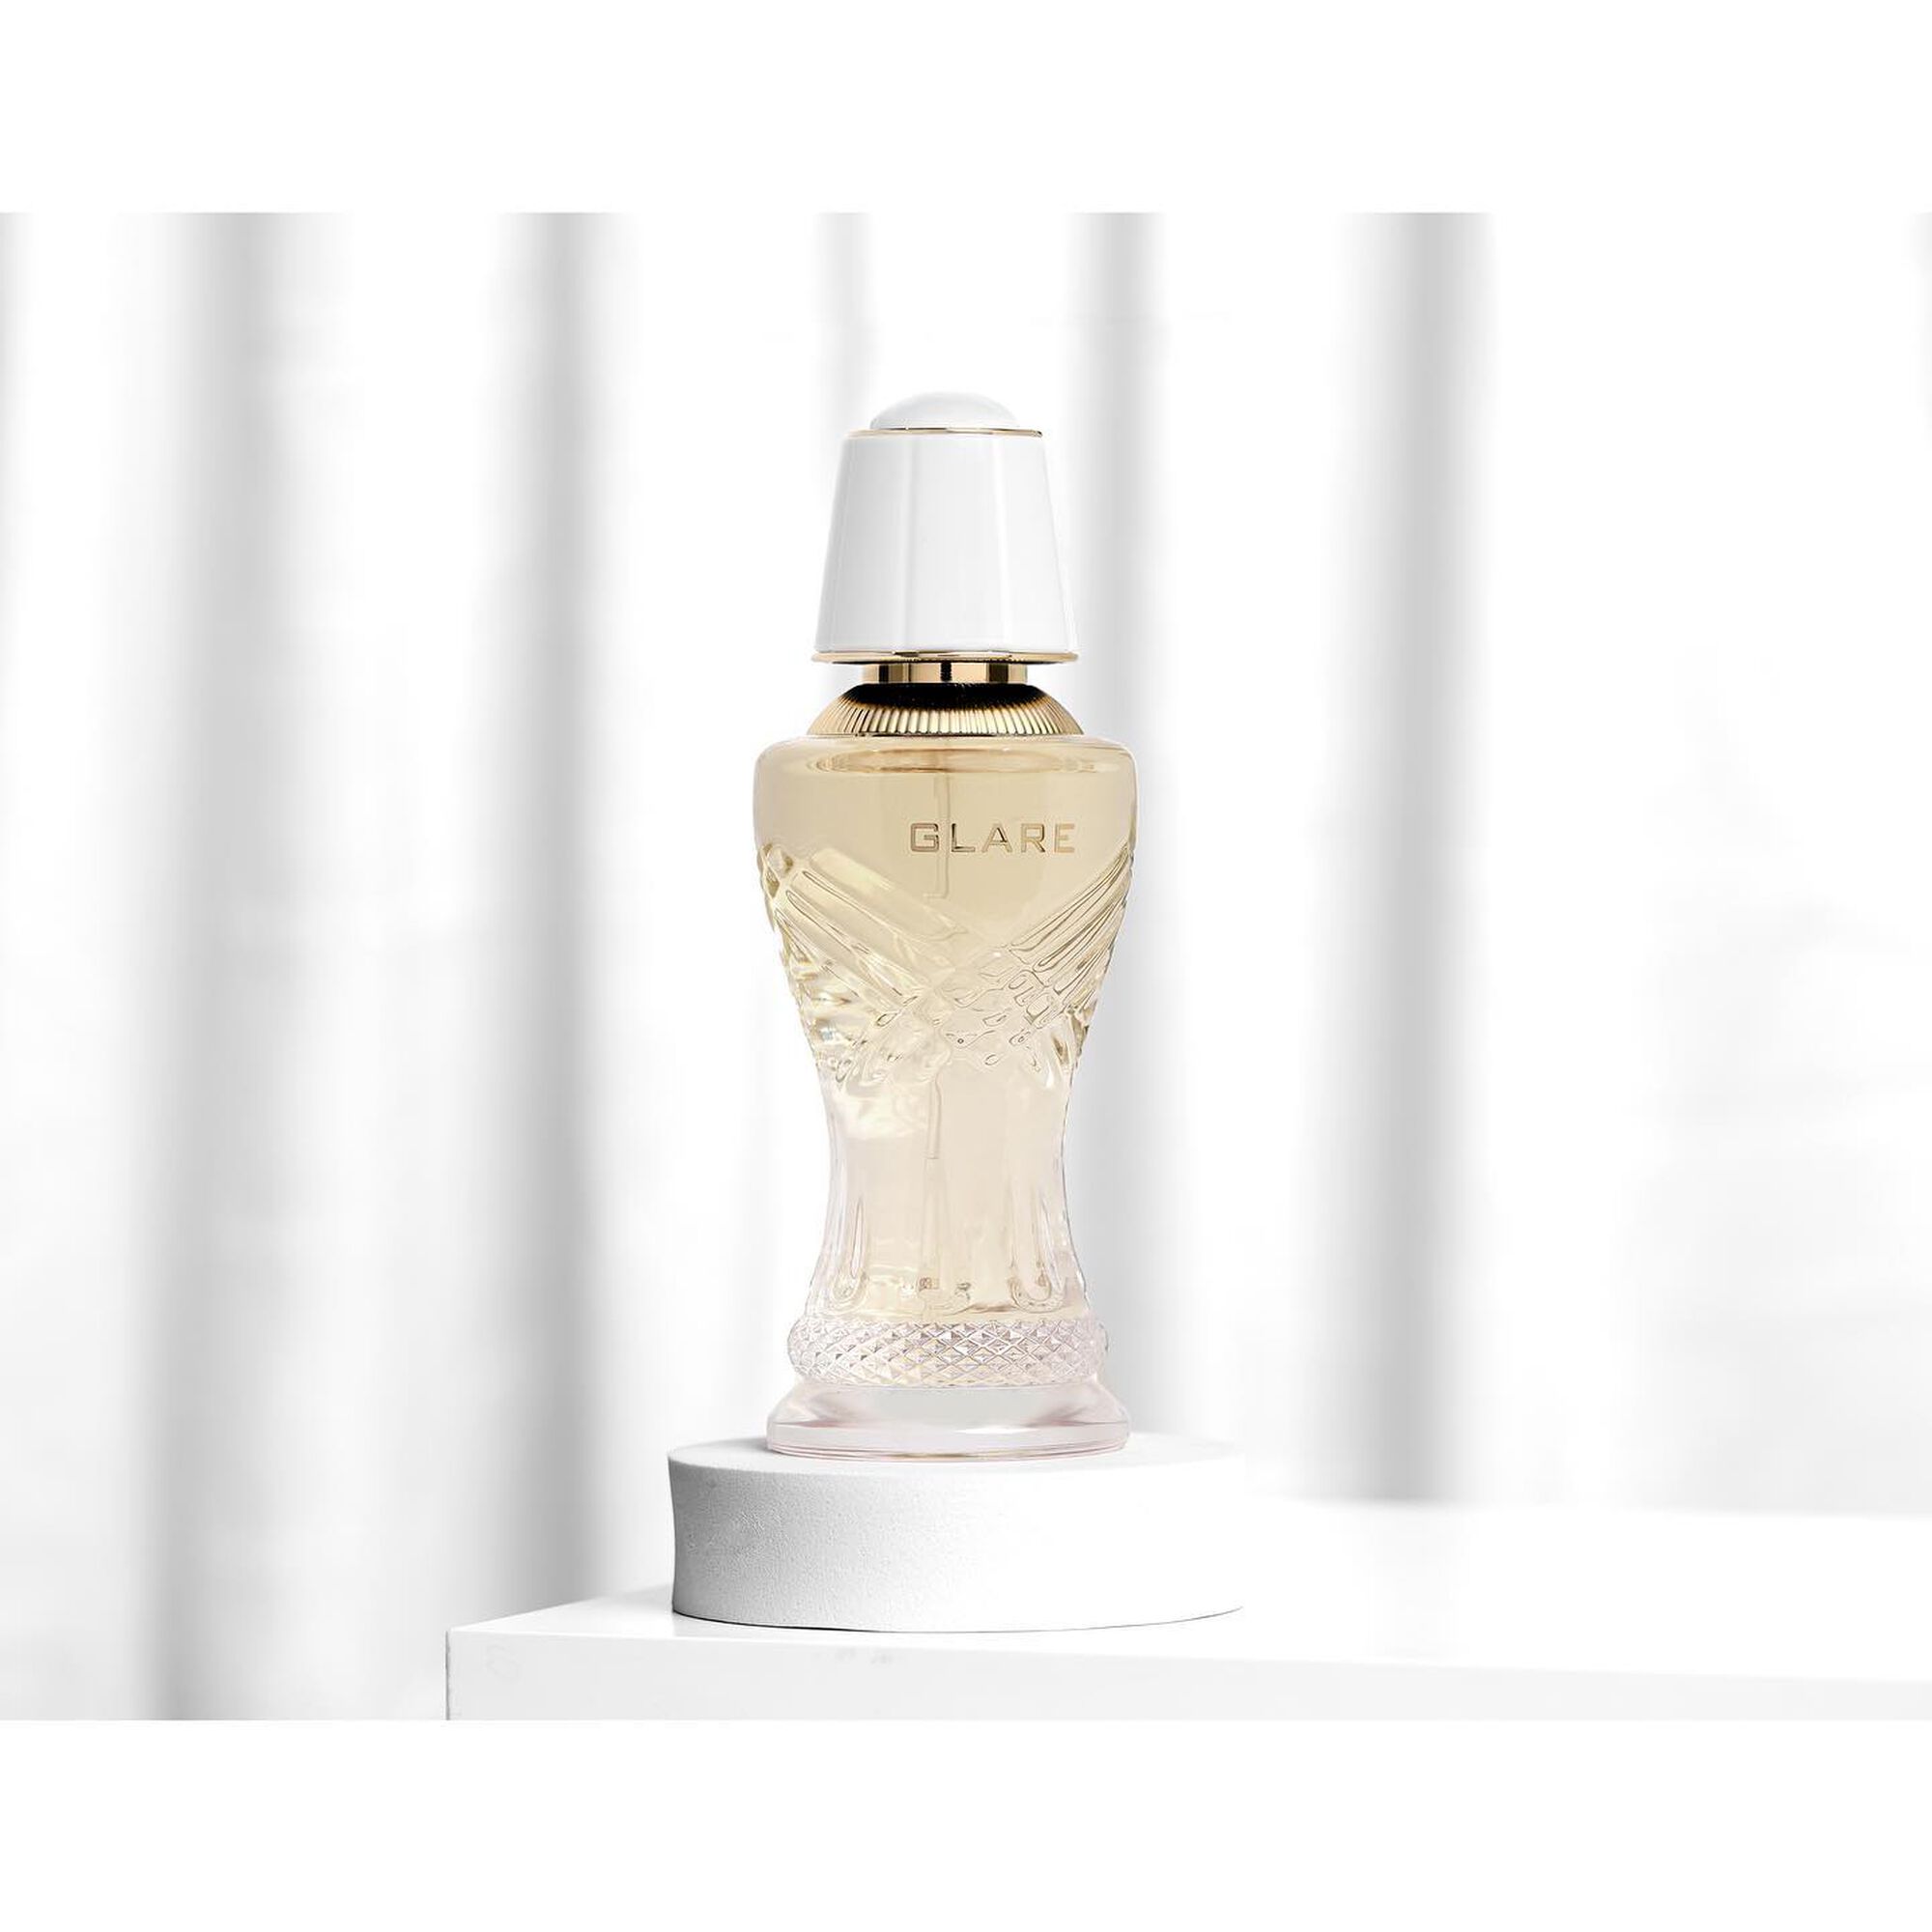 GLARE Perfume by Proud